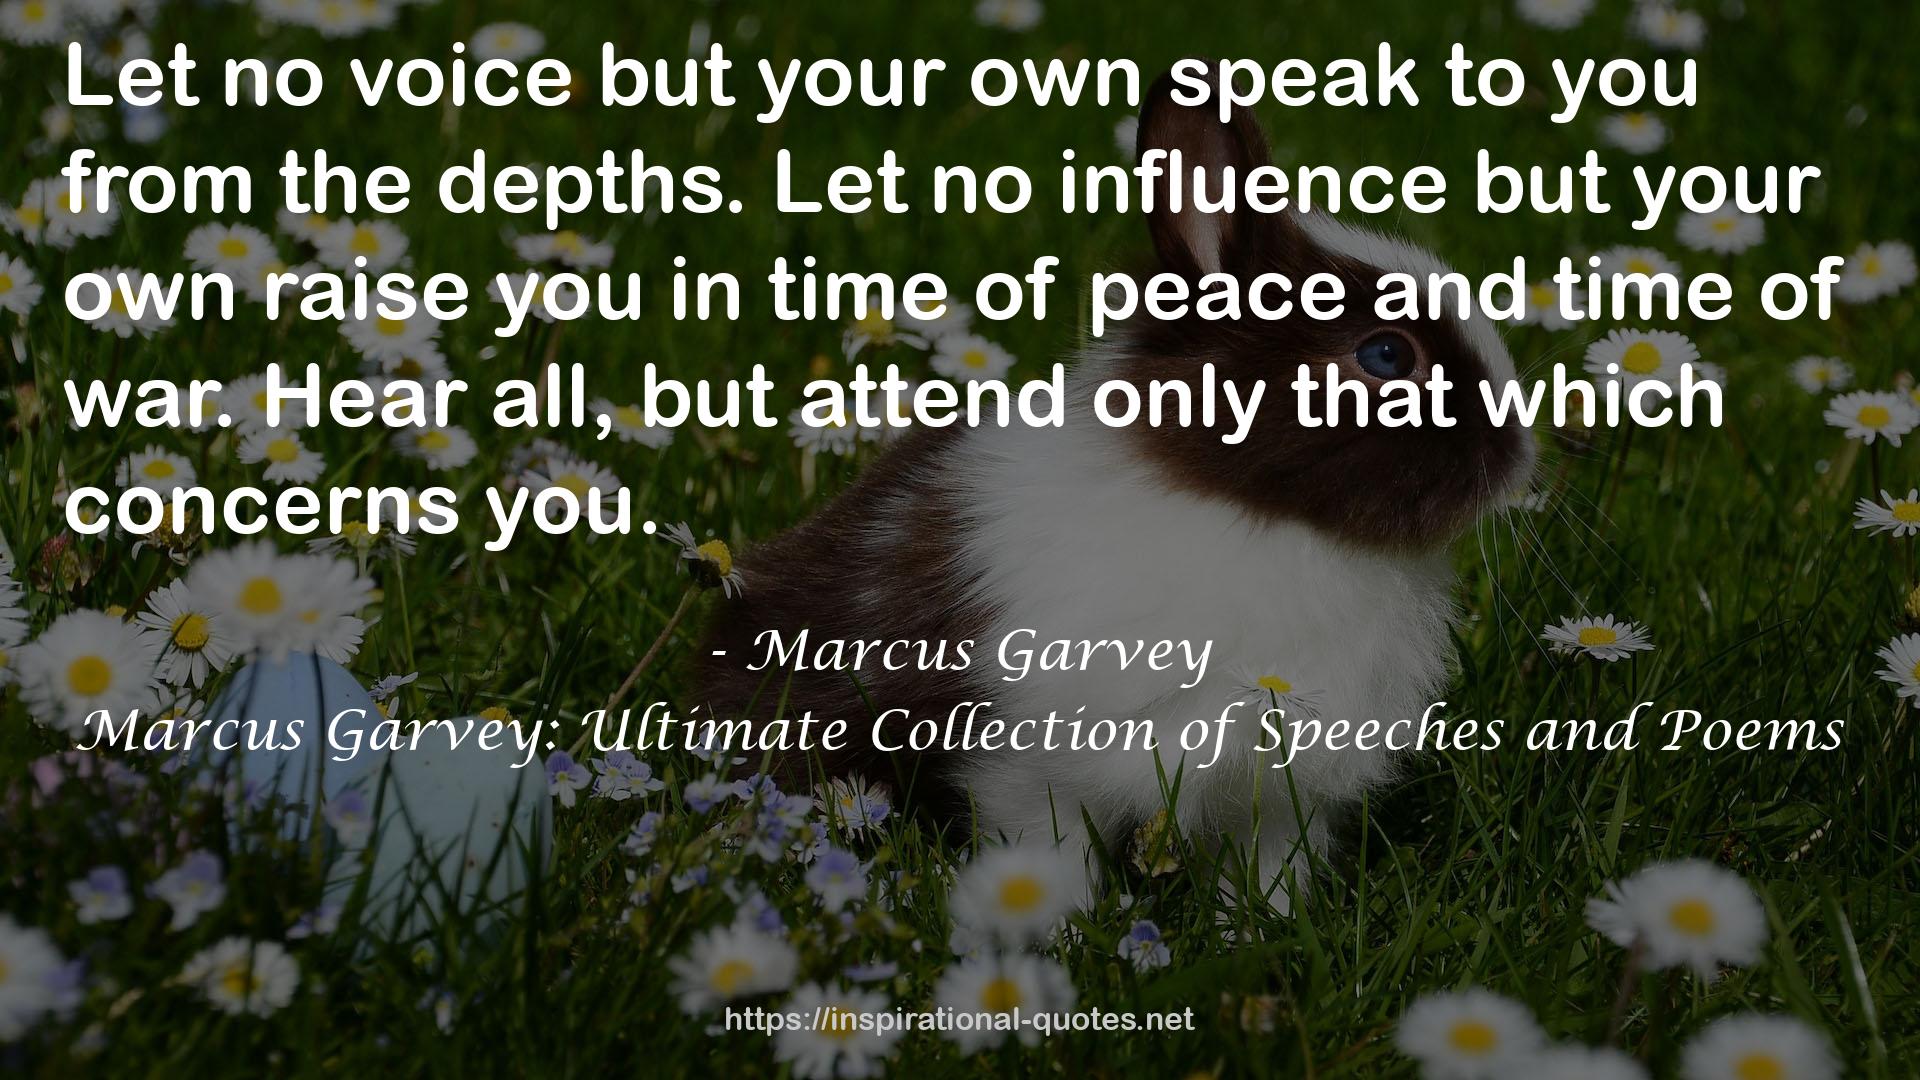 Marcus Garvey: Ultimate Collection of Speeches and Poems QUOTES